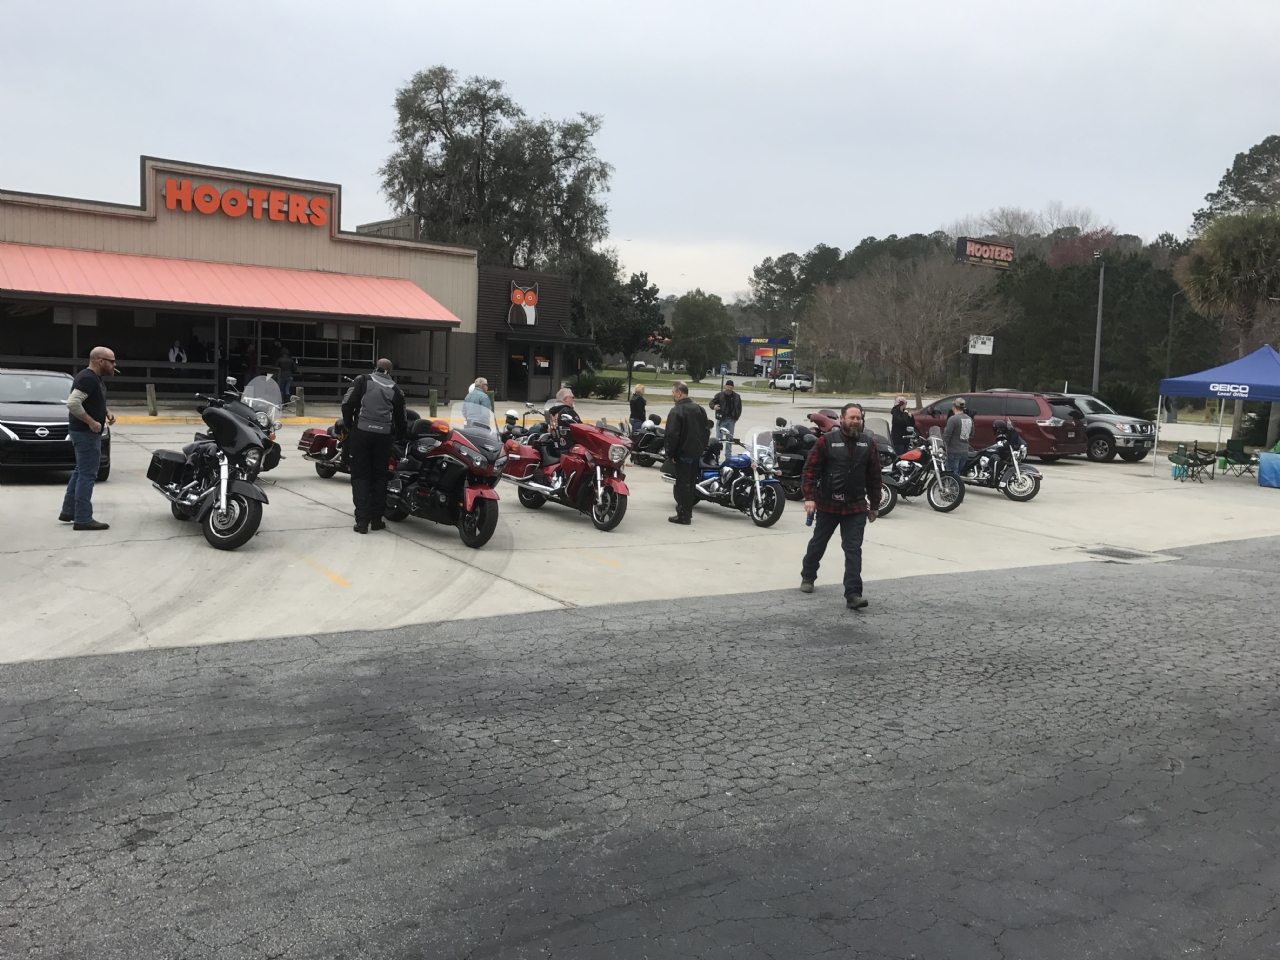 Our 1st attempt at hosting a Poker Run as a Fundraiser! 
We had a great turnout and learned a lot.